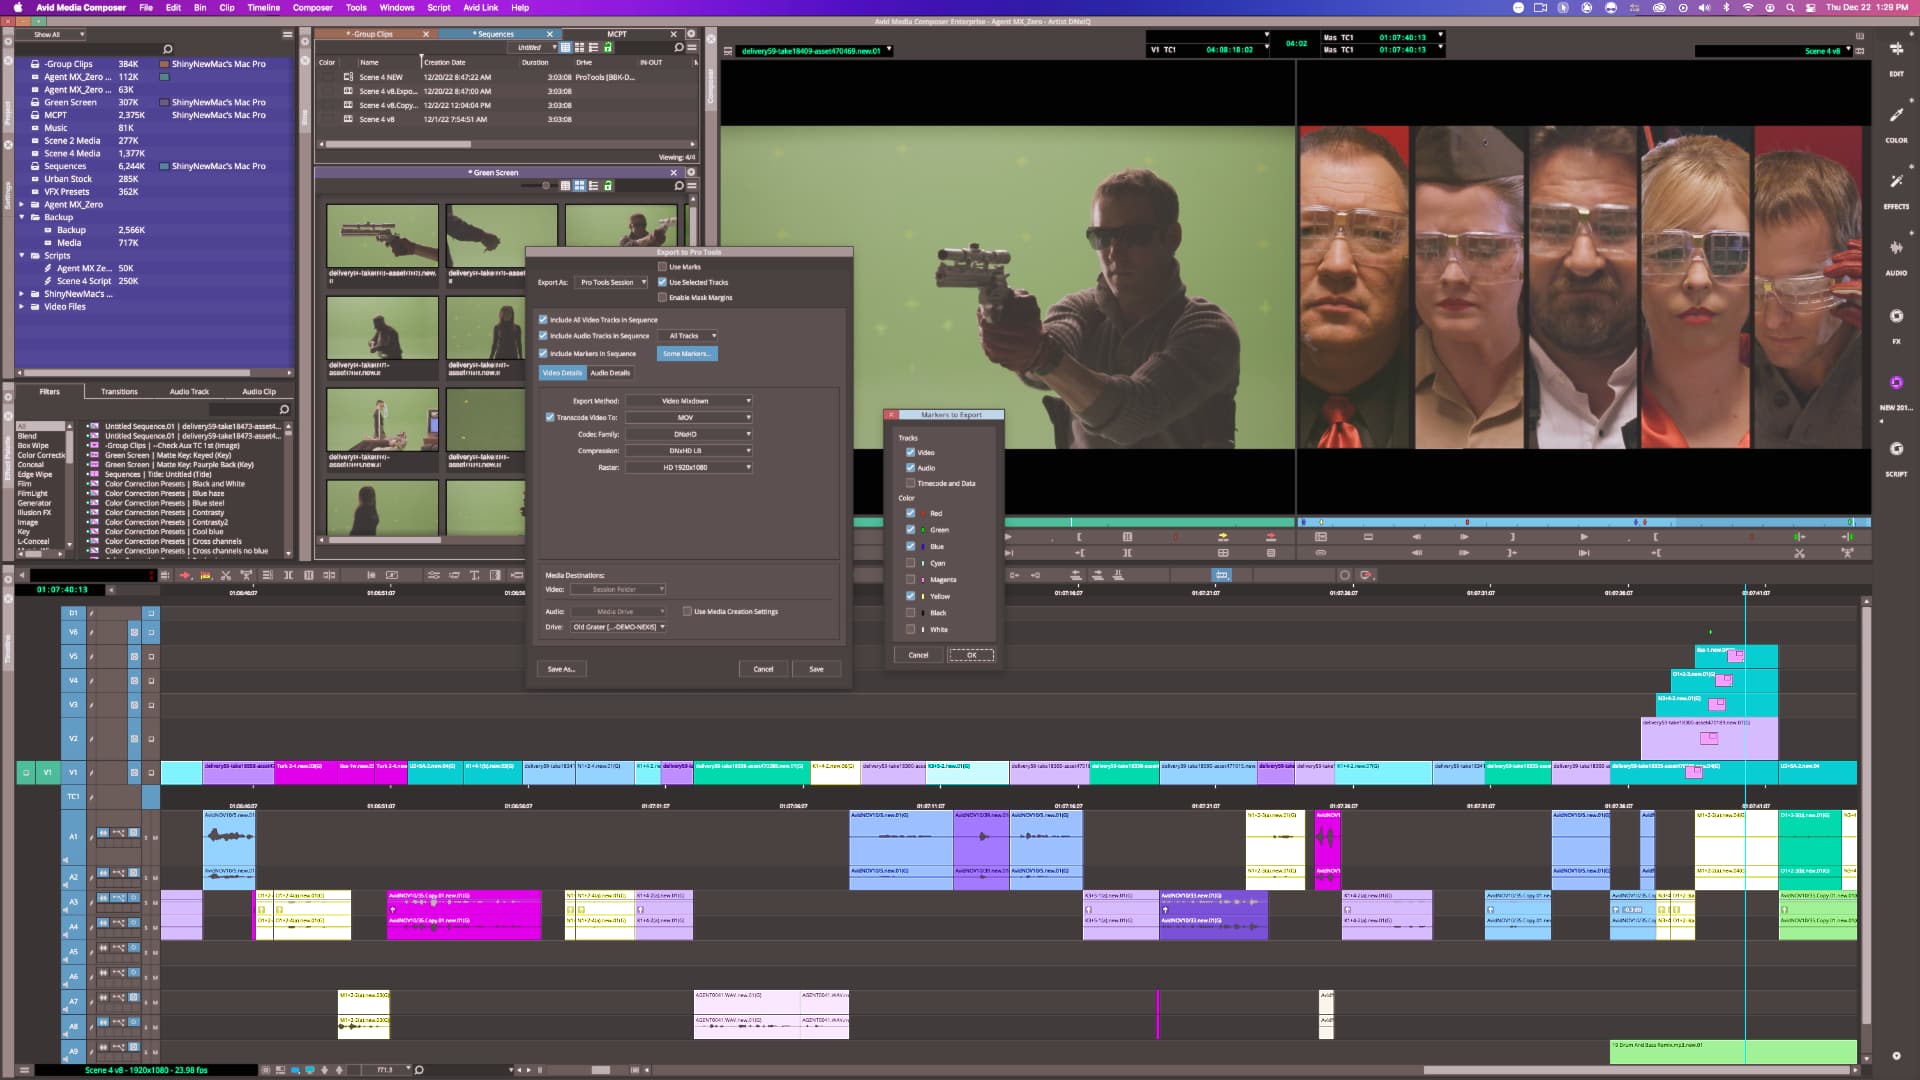 Avid Media Composer's UI has evolved over the years to its current form